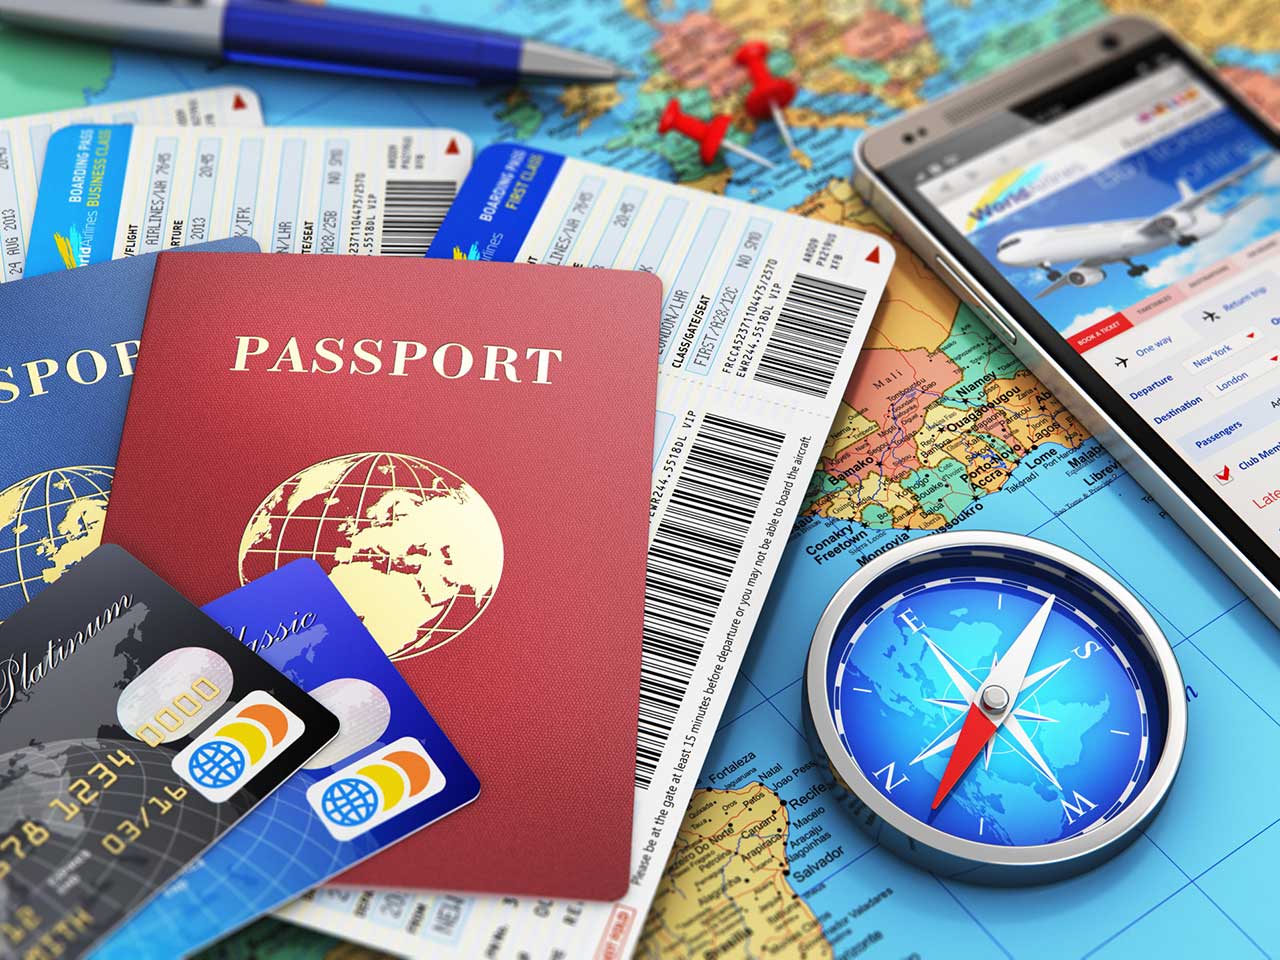 Passports, travel tickets, maps, credit cards and travel apps